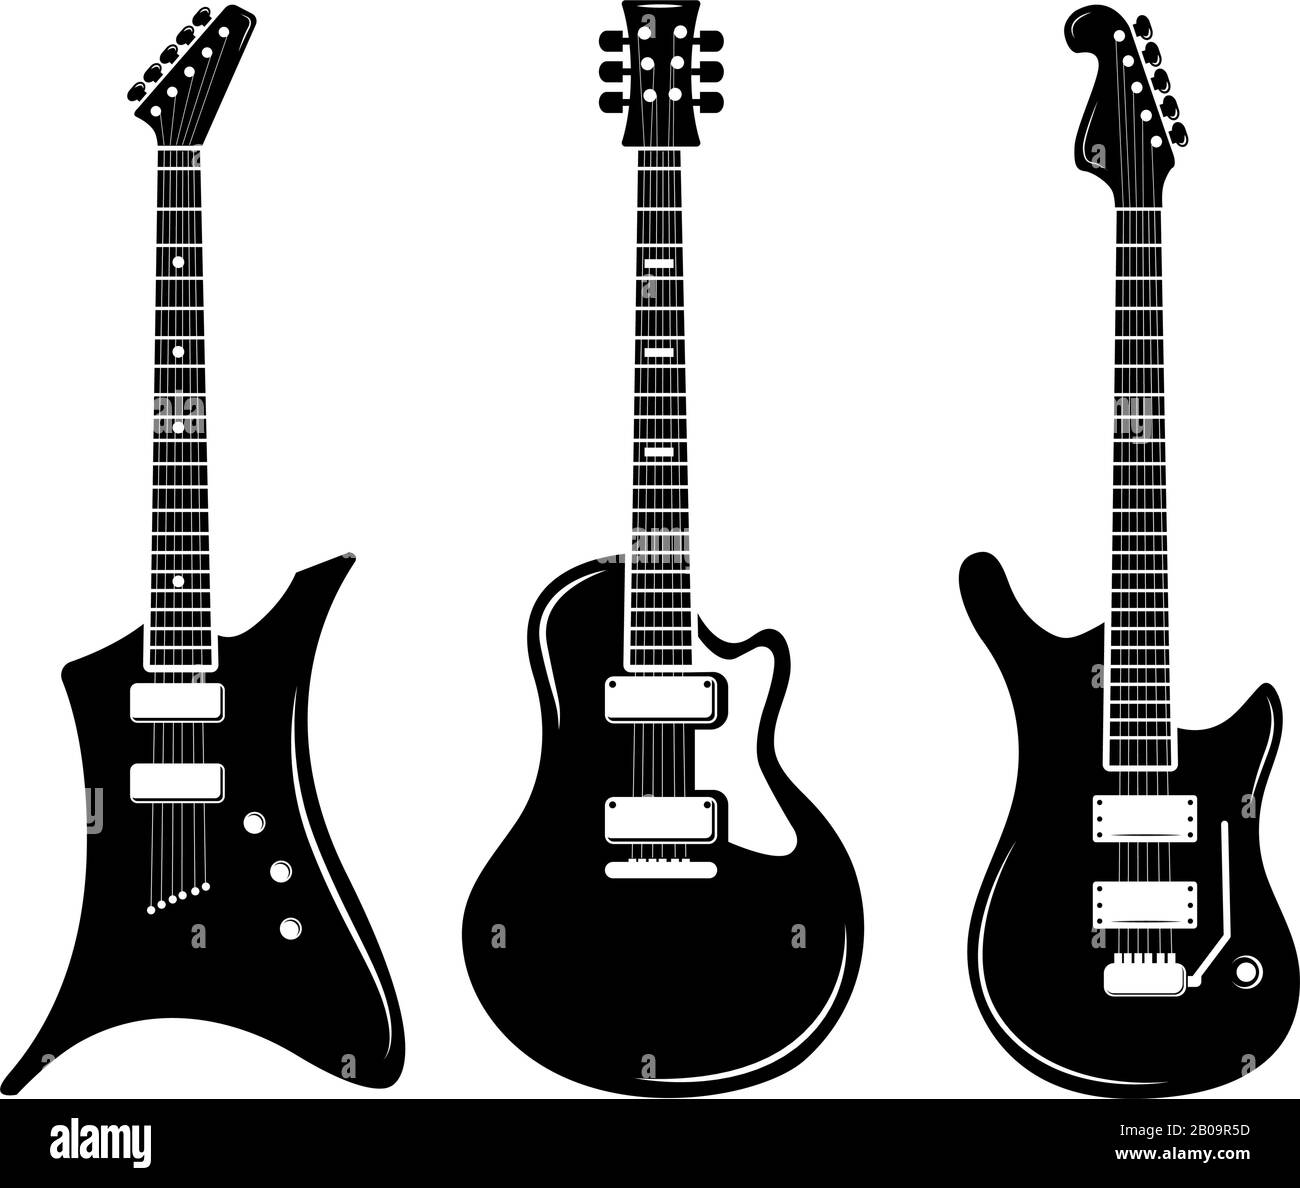 Vector black guitar icons acoustic and electric guitars. Musical guitar instrument for playing rock, illustration of black silhouette electric guitar Stock Vector